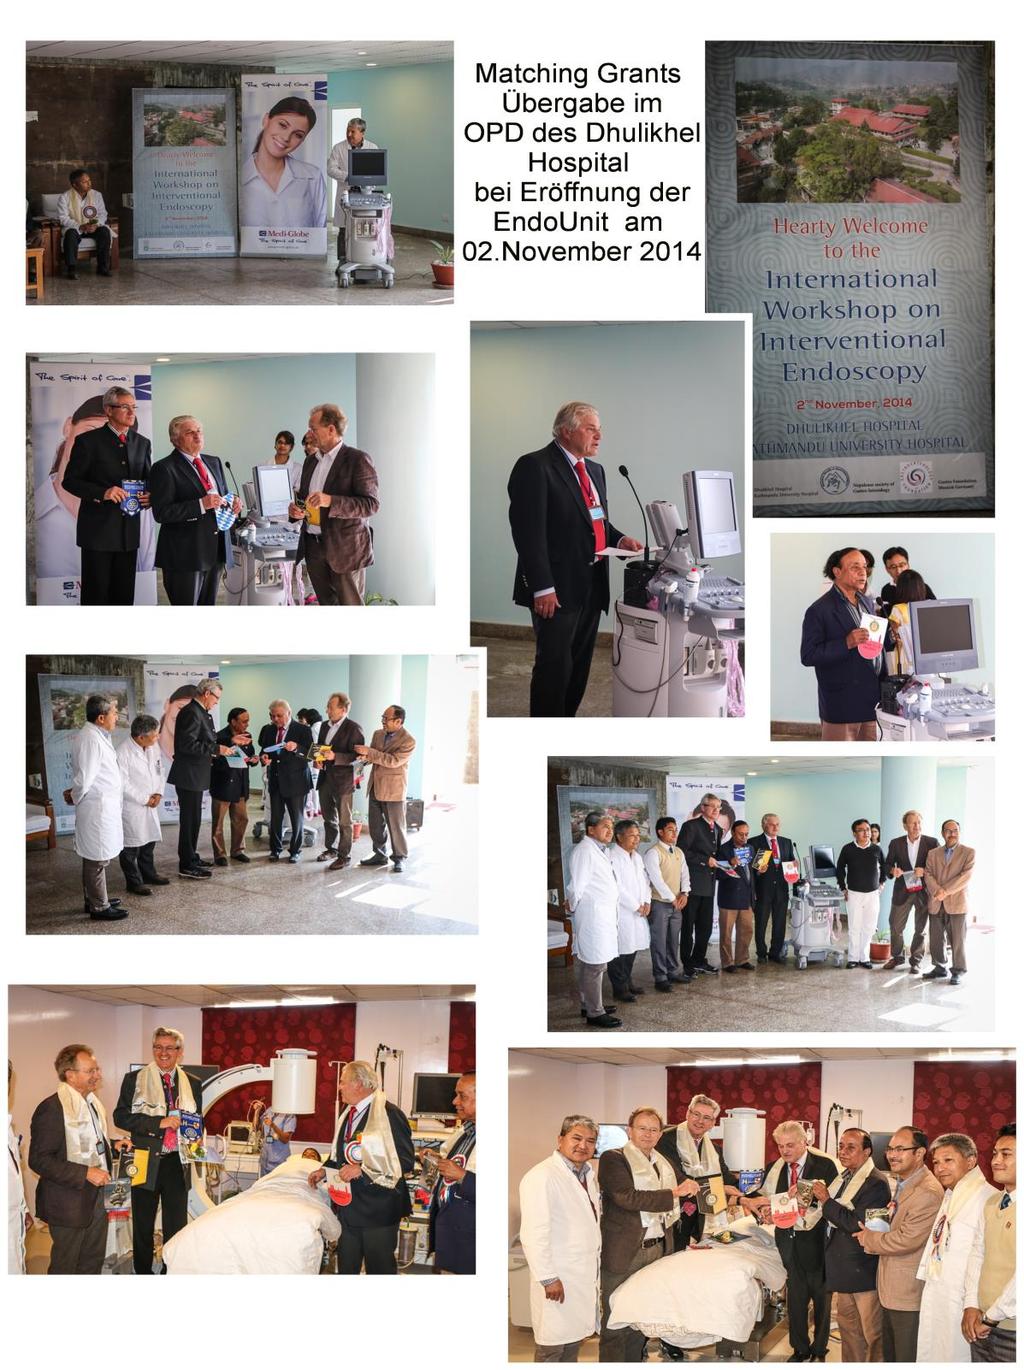 Matching grants handover in the OPD of Dhulikhel Hospital during the opening of the endoscopy unit on November 2, 2014 Handover ceremony for the new X-ray and